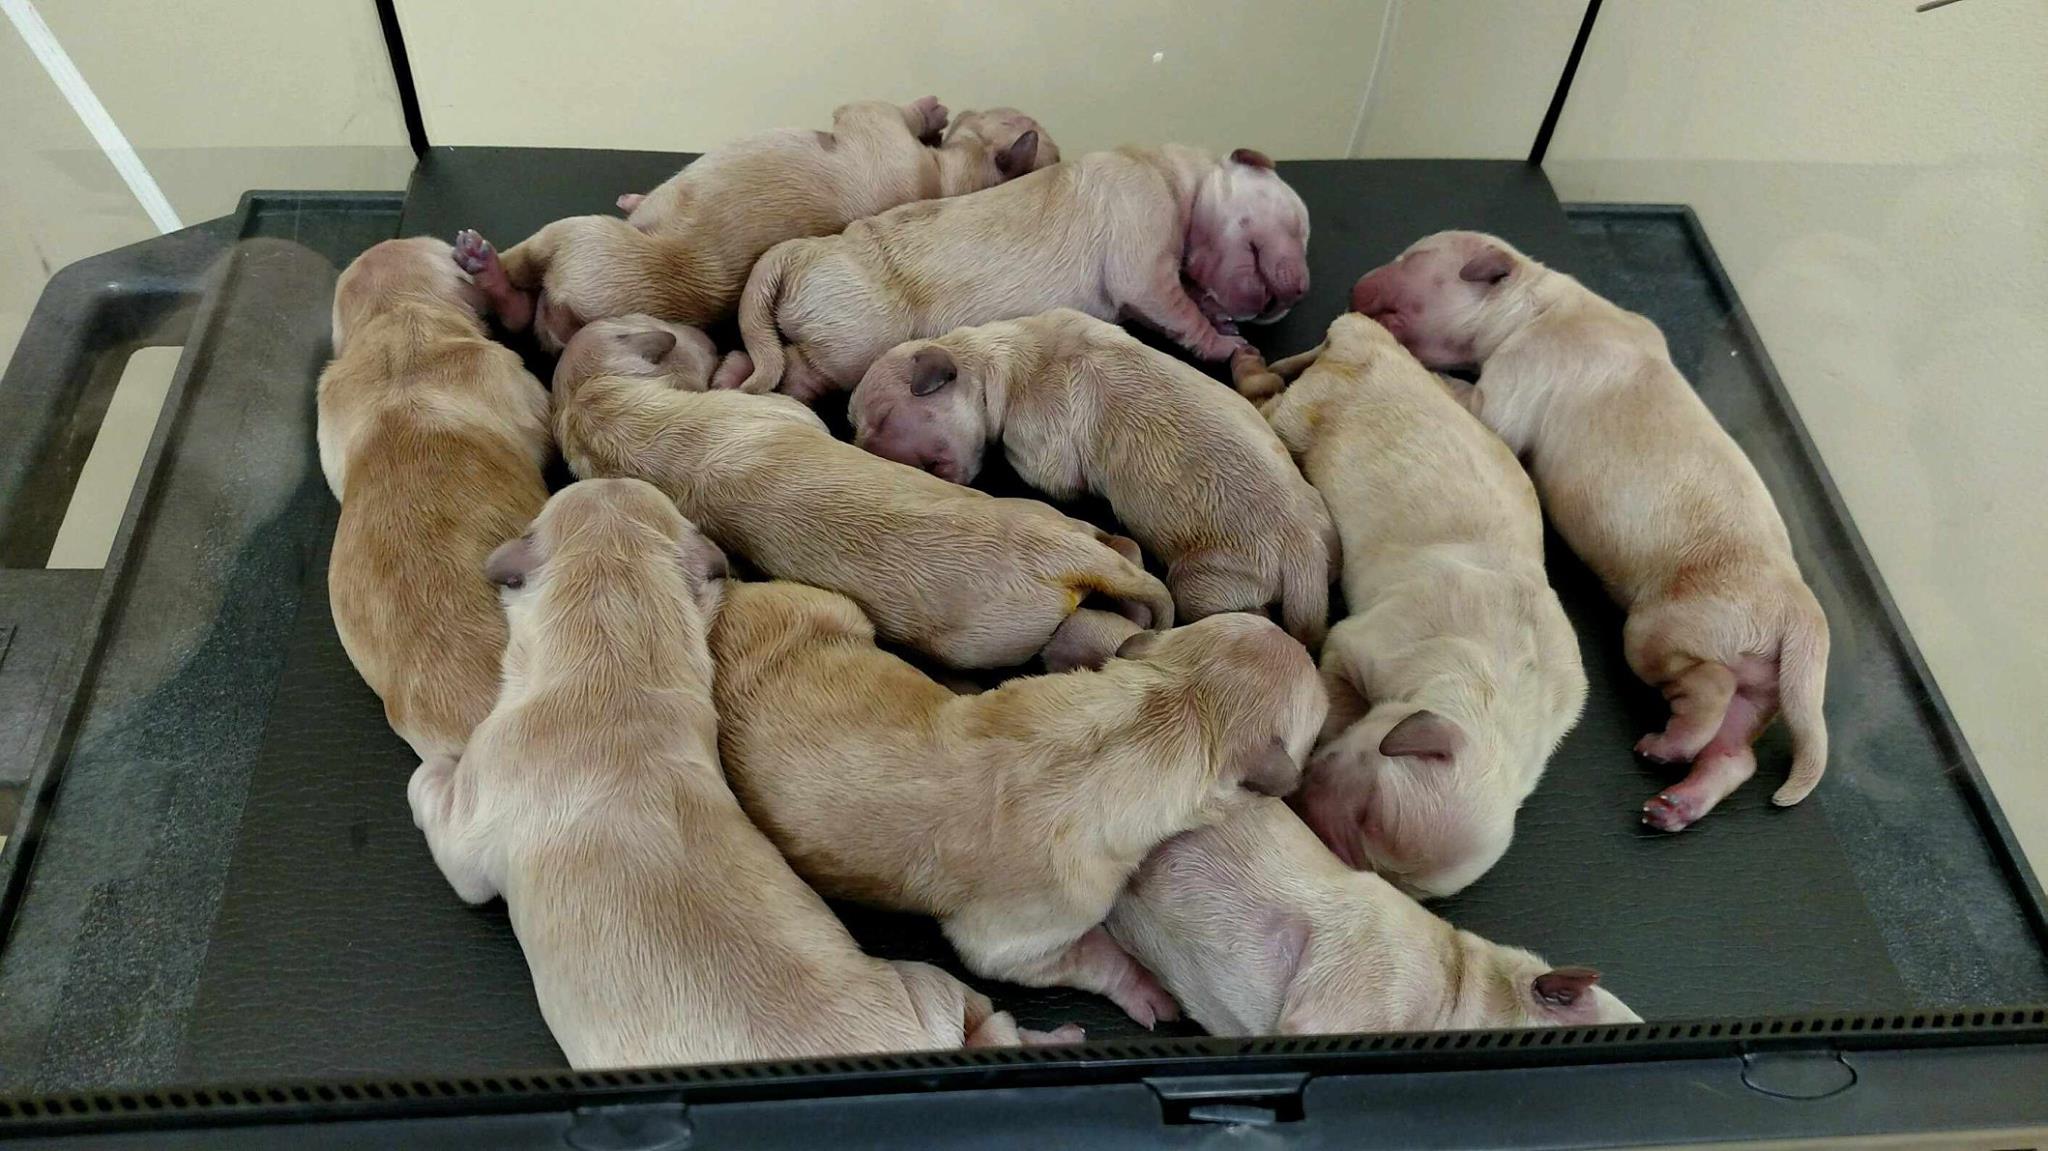 puppy incubator with oxygen